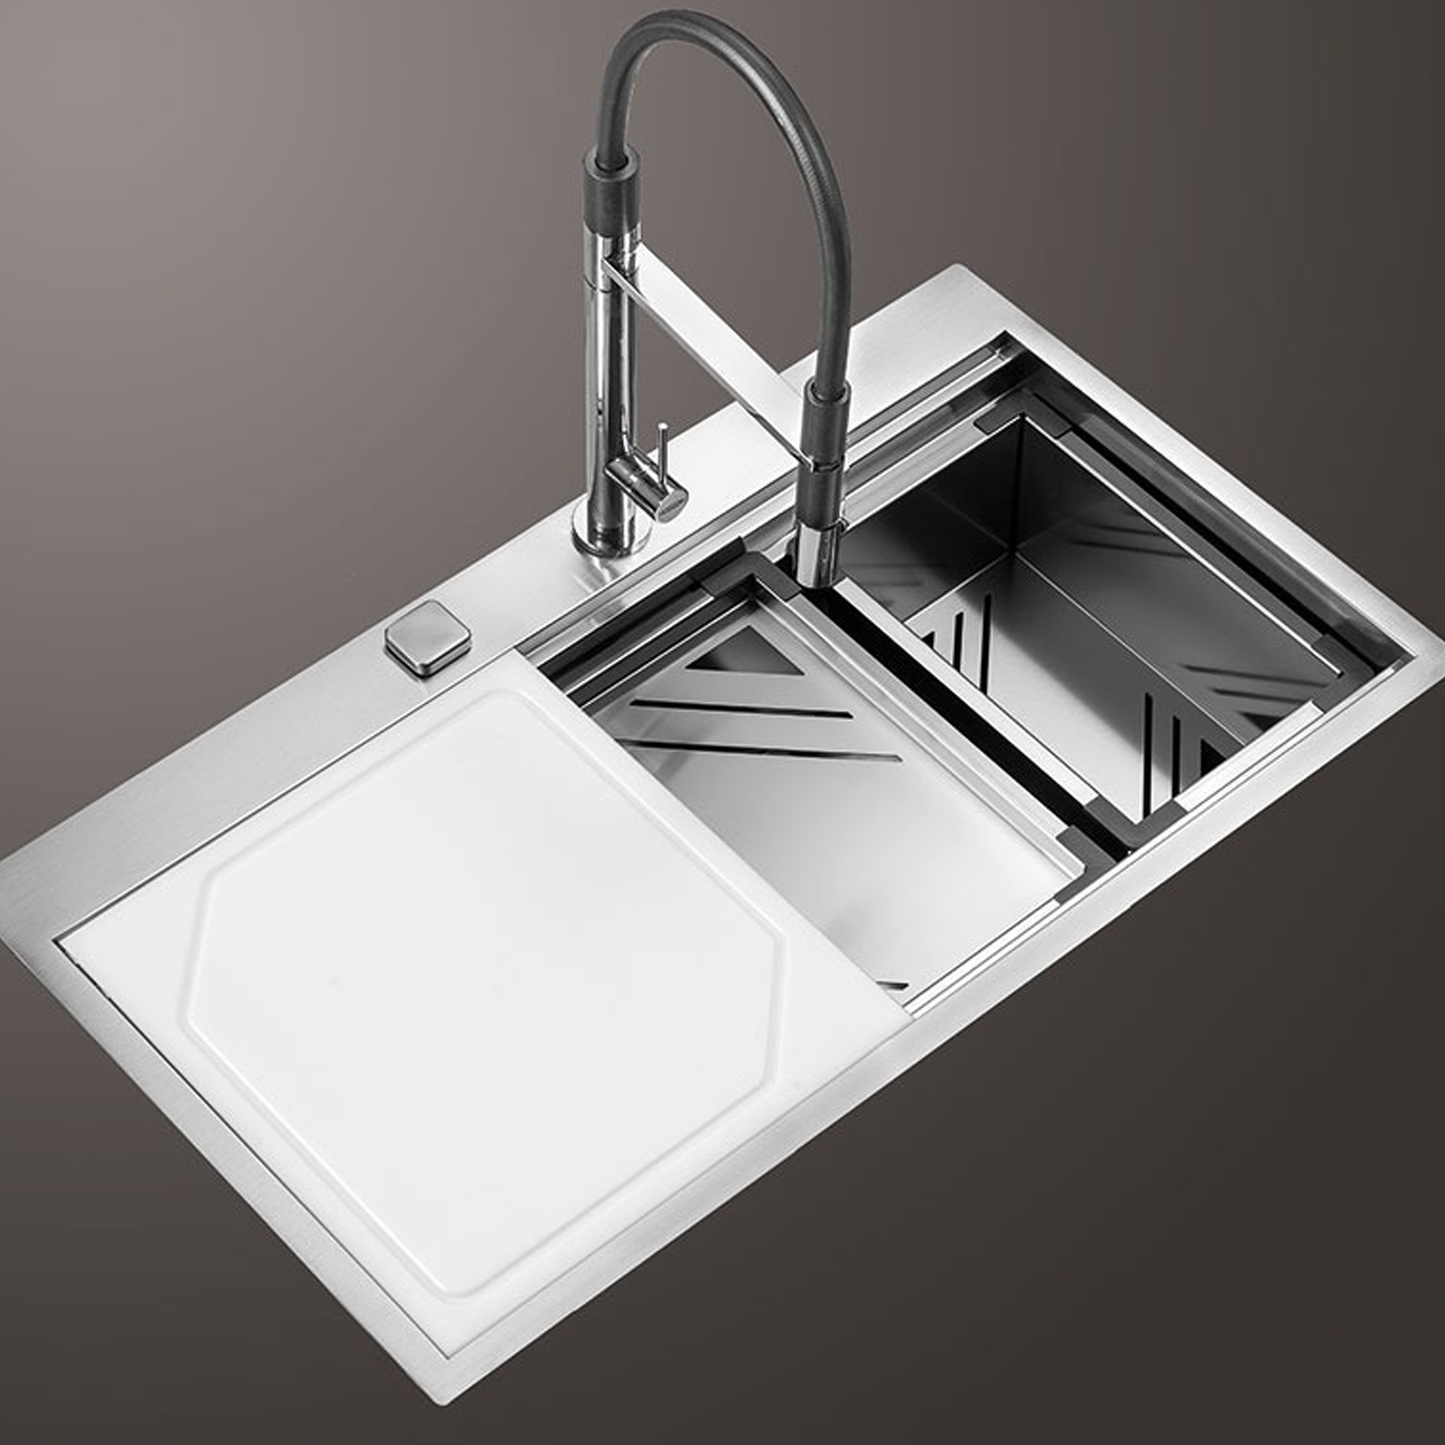 CM ITALIA Stainless steel drain tray for CM sinks | Made in Italy | 意大利製 不銹鋼瀝水板 配合CM星盆 廚房